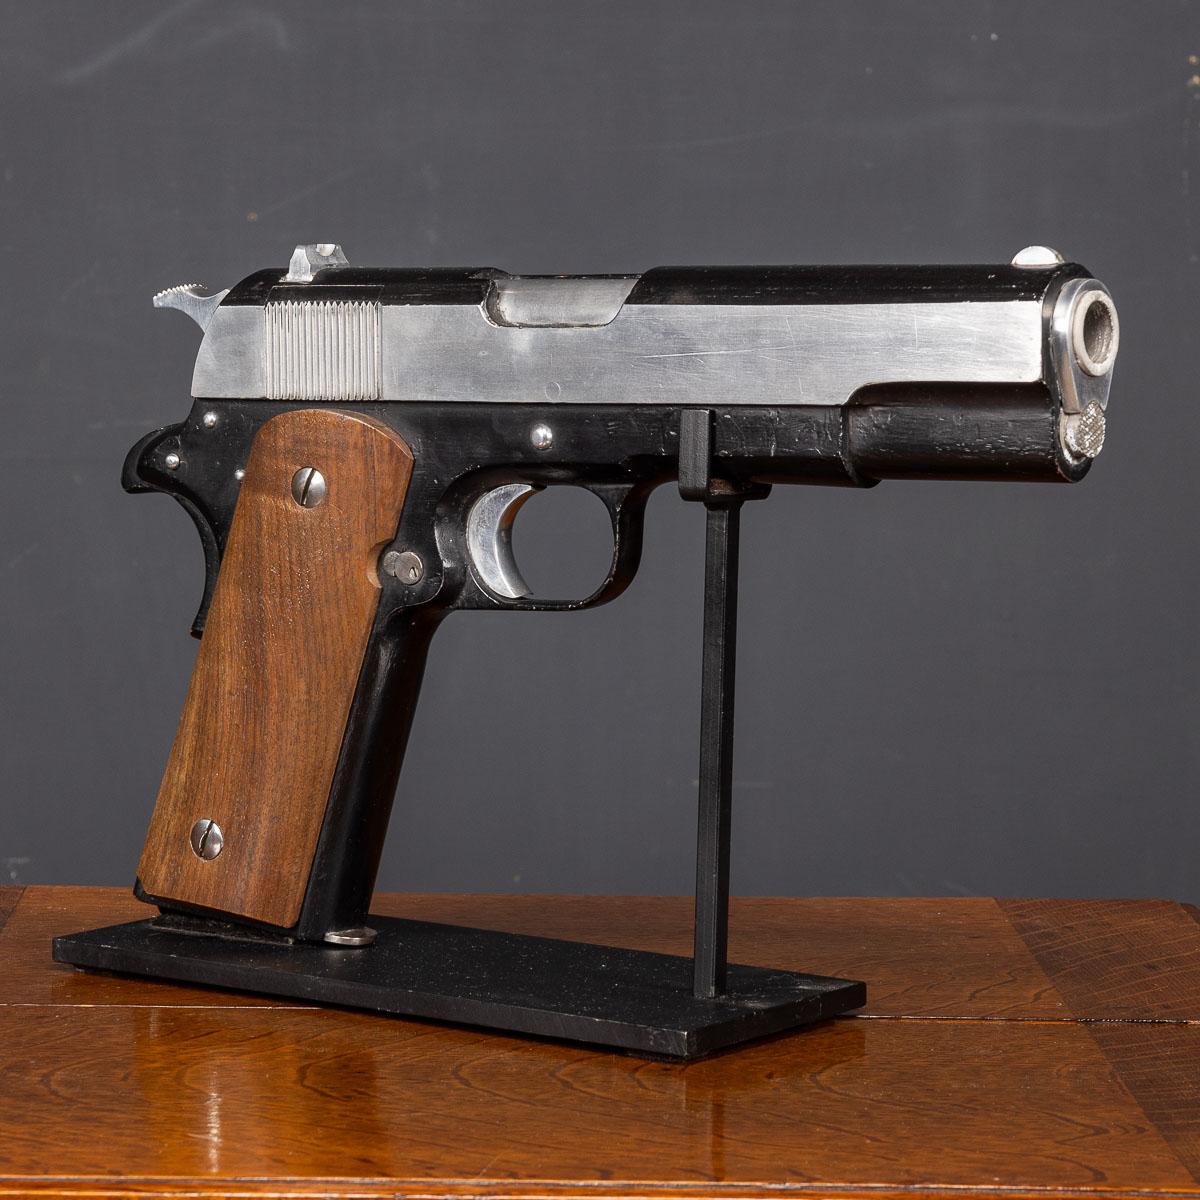 This large model of the M1911, standing over a meter tall, also known as the Colt 1911 or Colt Government for Colt-produced models, stands as an iconic firearm. This single-action, recoil-operated, semi-automatic pistol is chambered for the .45 ACP